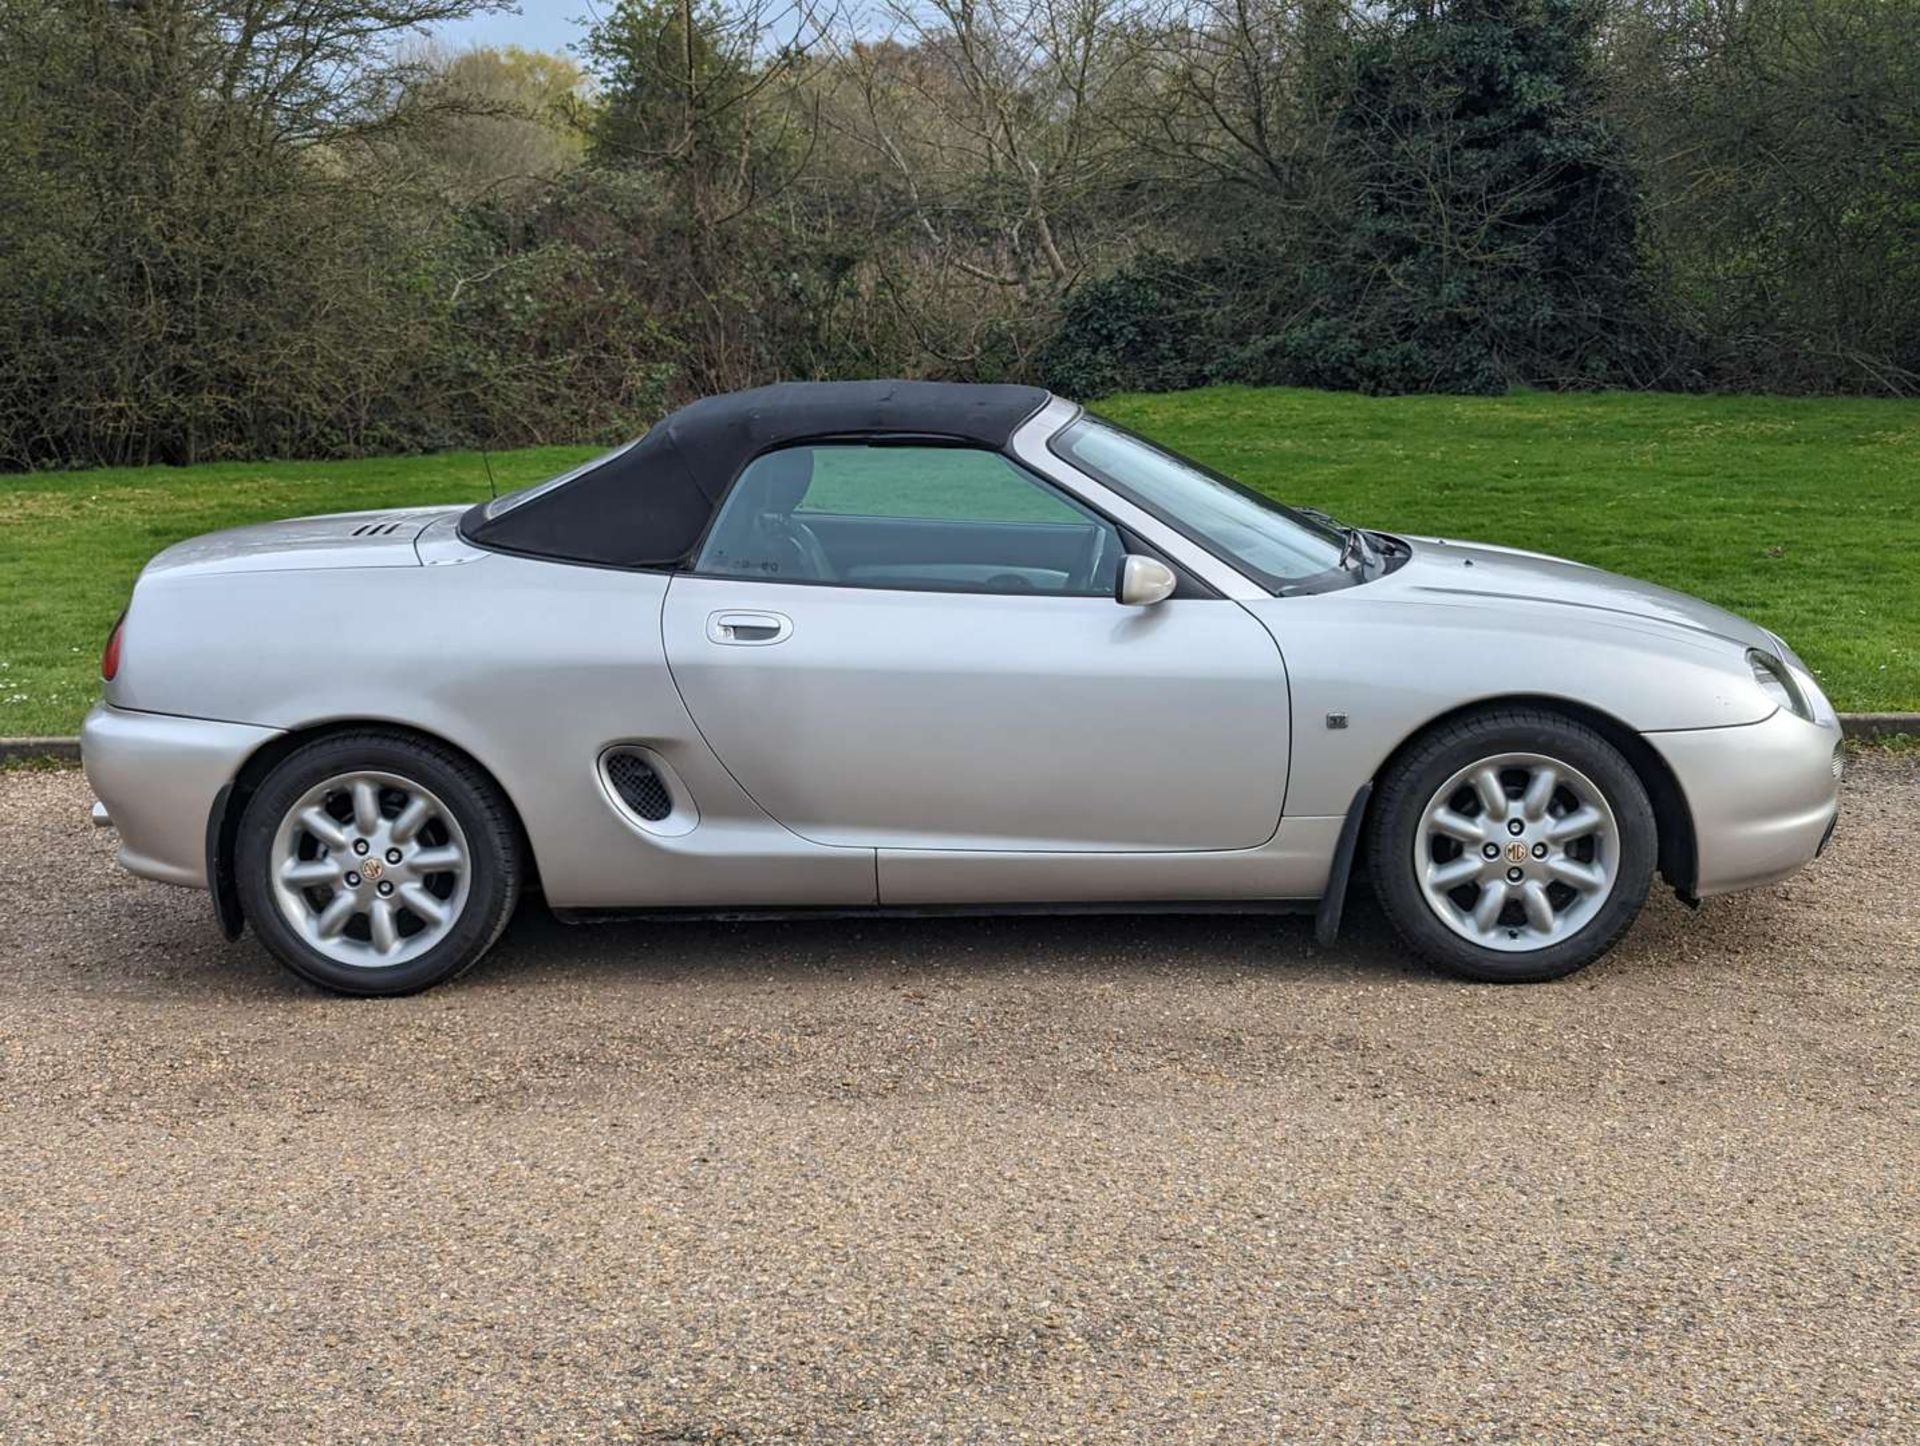 2000 MGF 1.8I VVC - Image 8 of 25